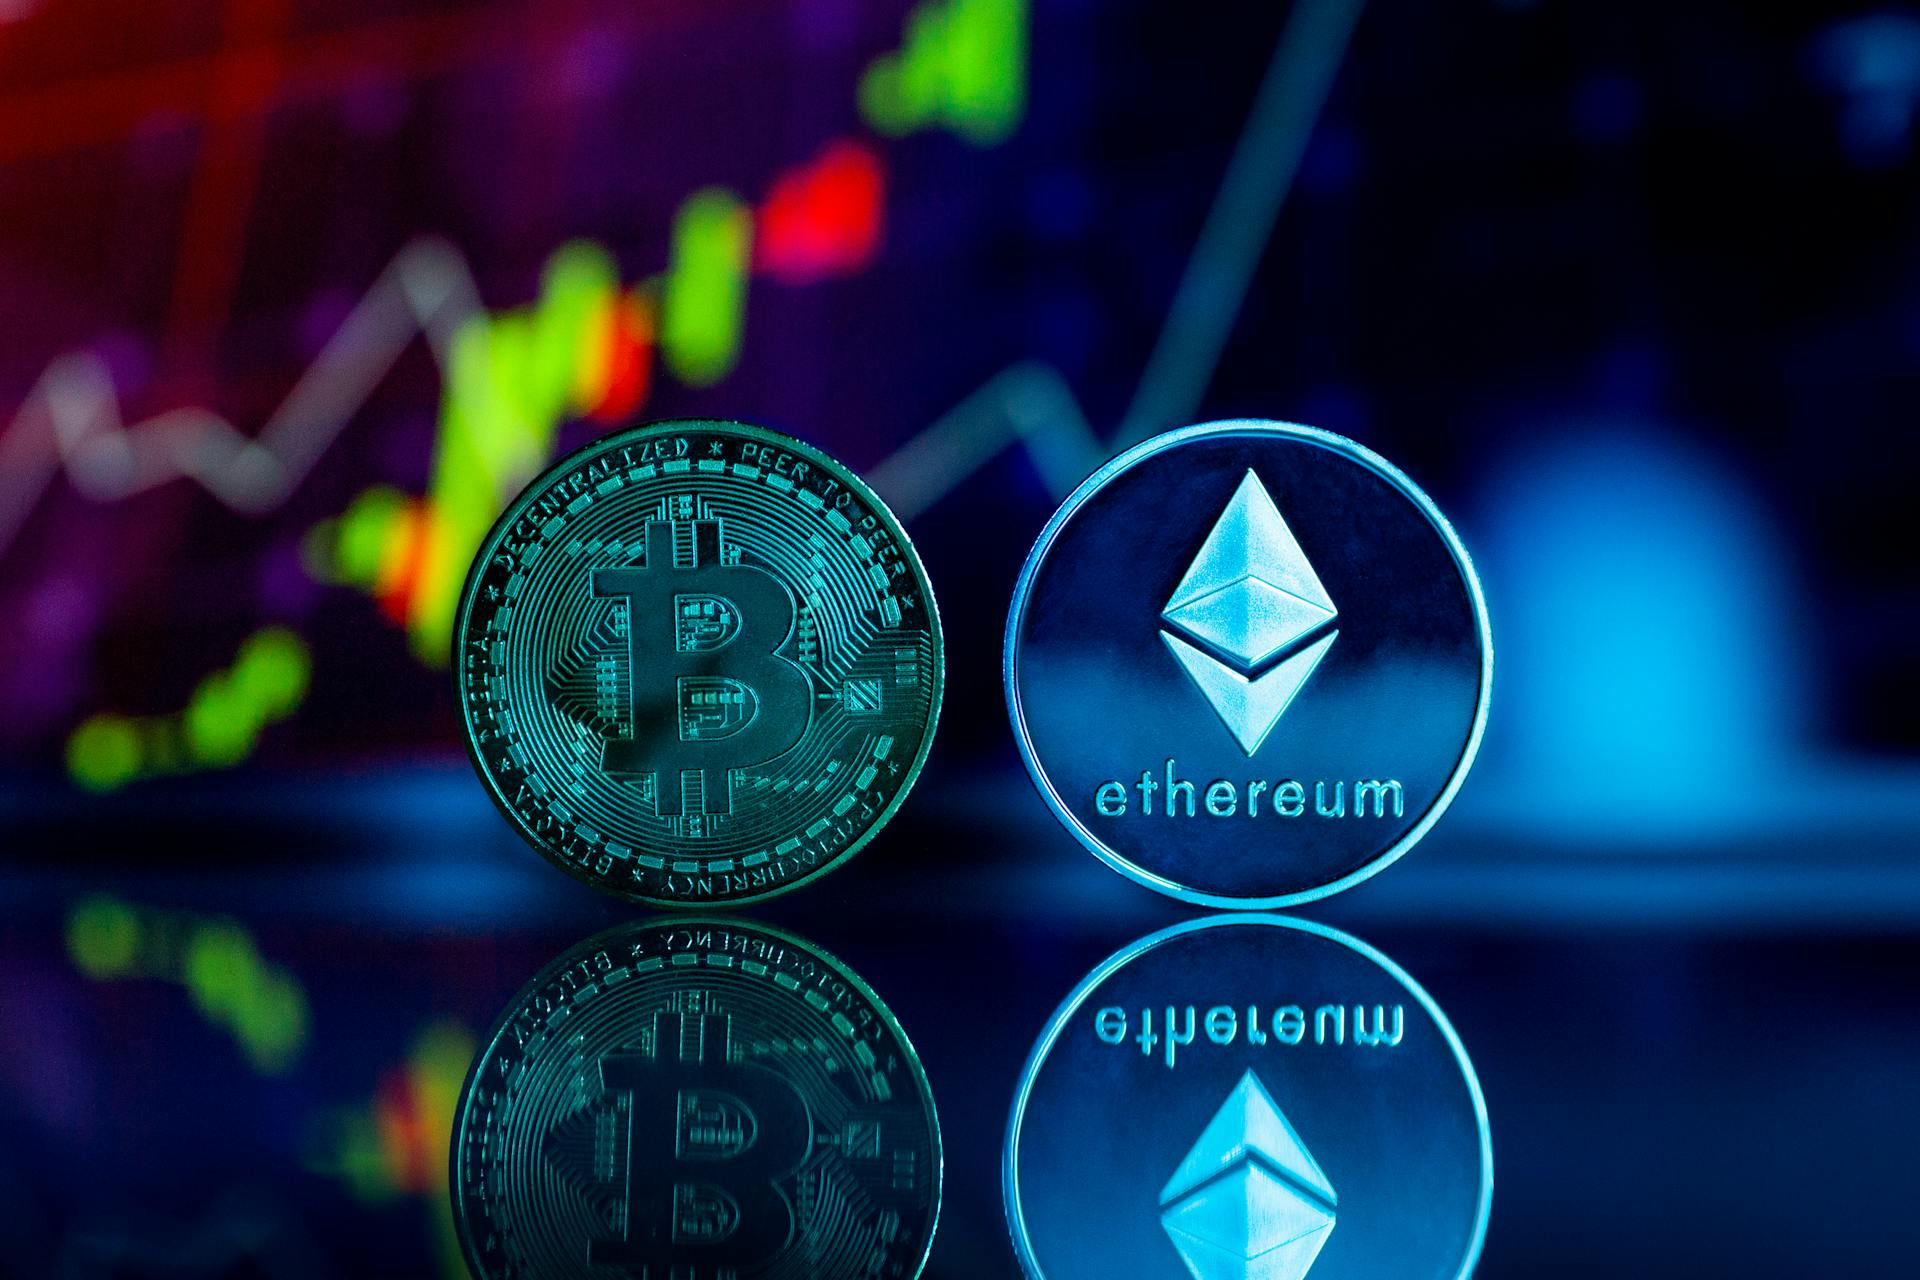 Ethereum vs Ethereum Classic: What’s the Difference?